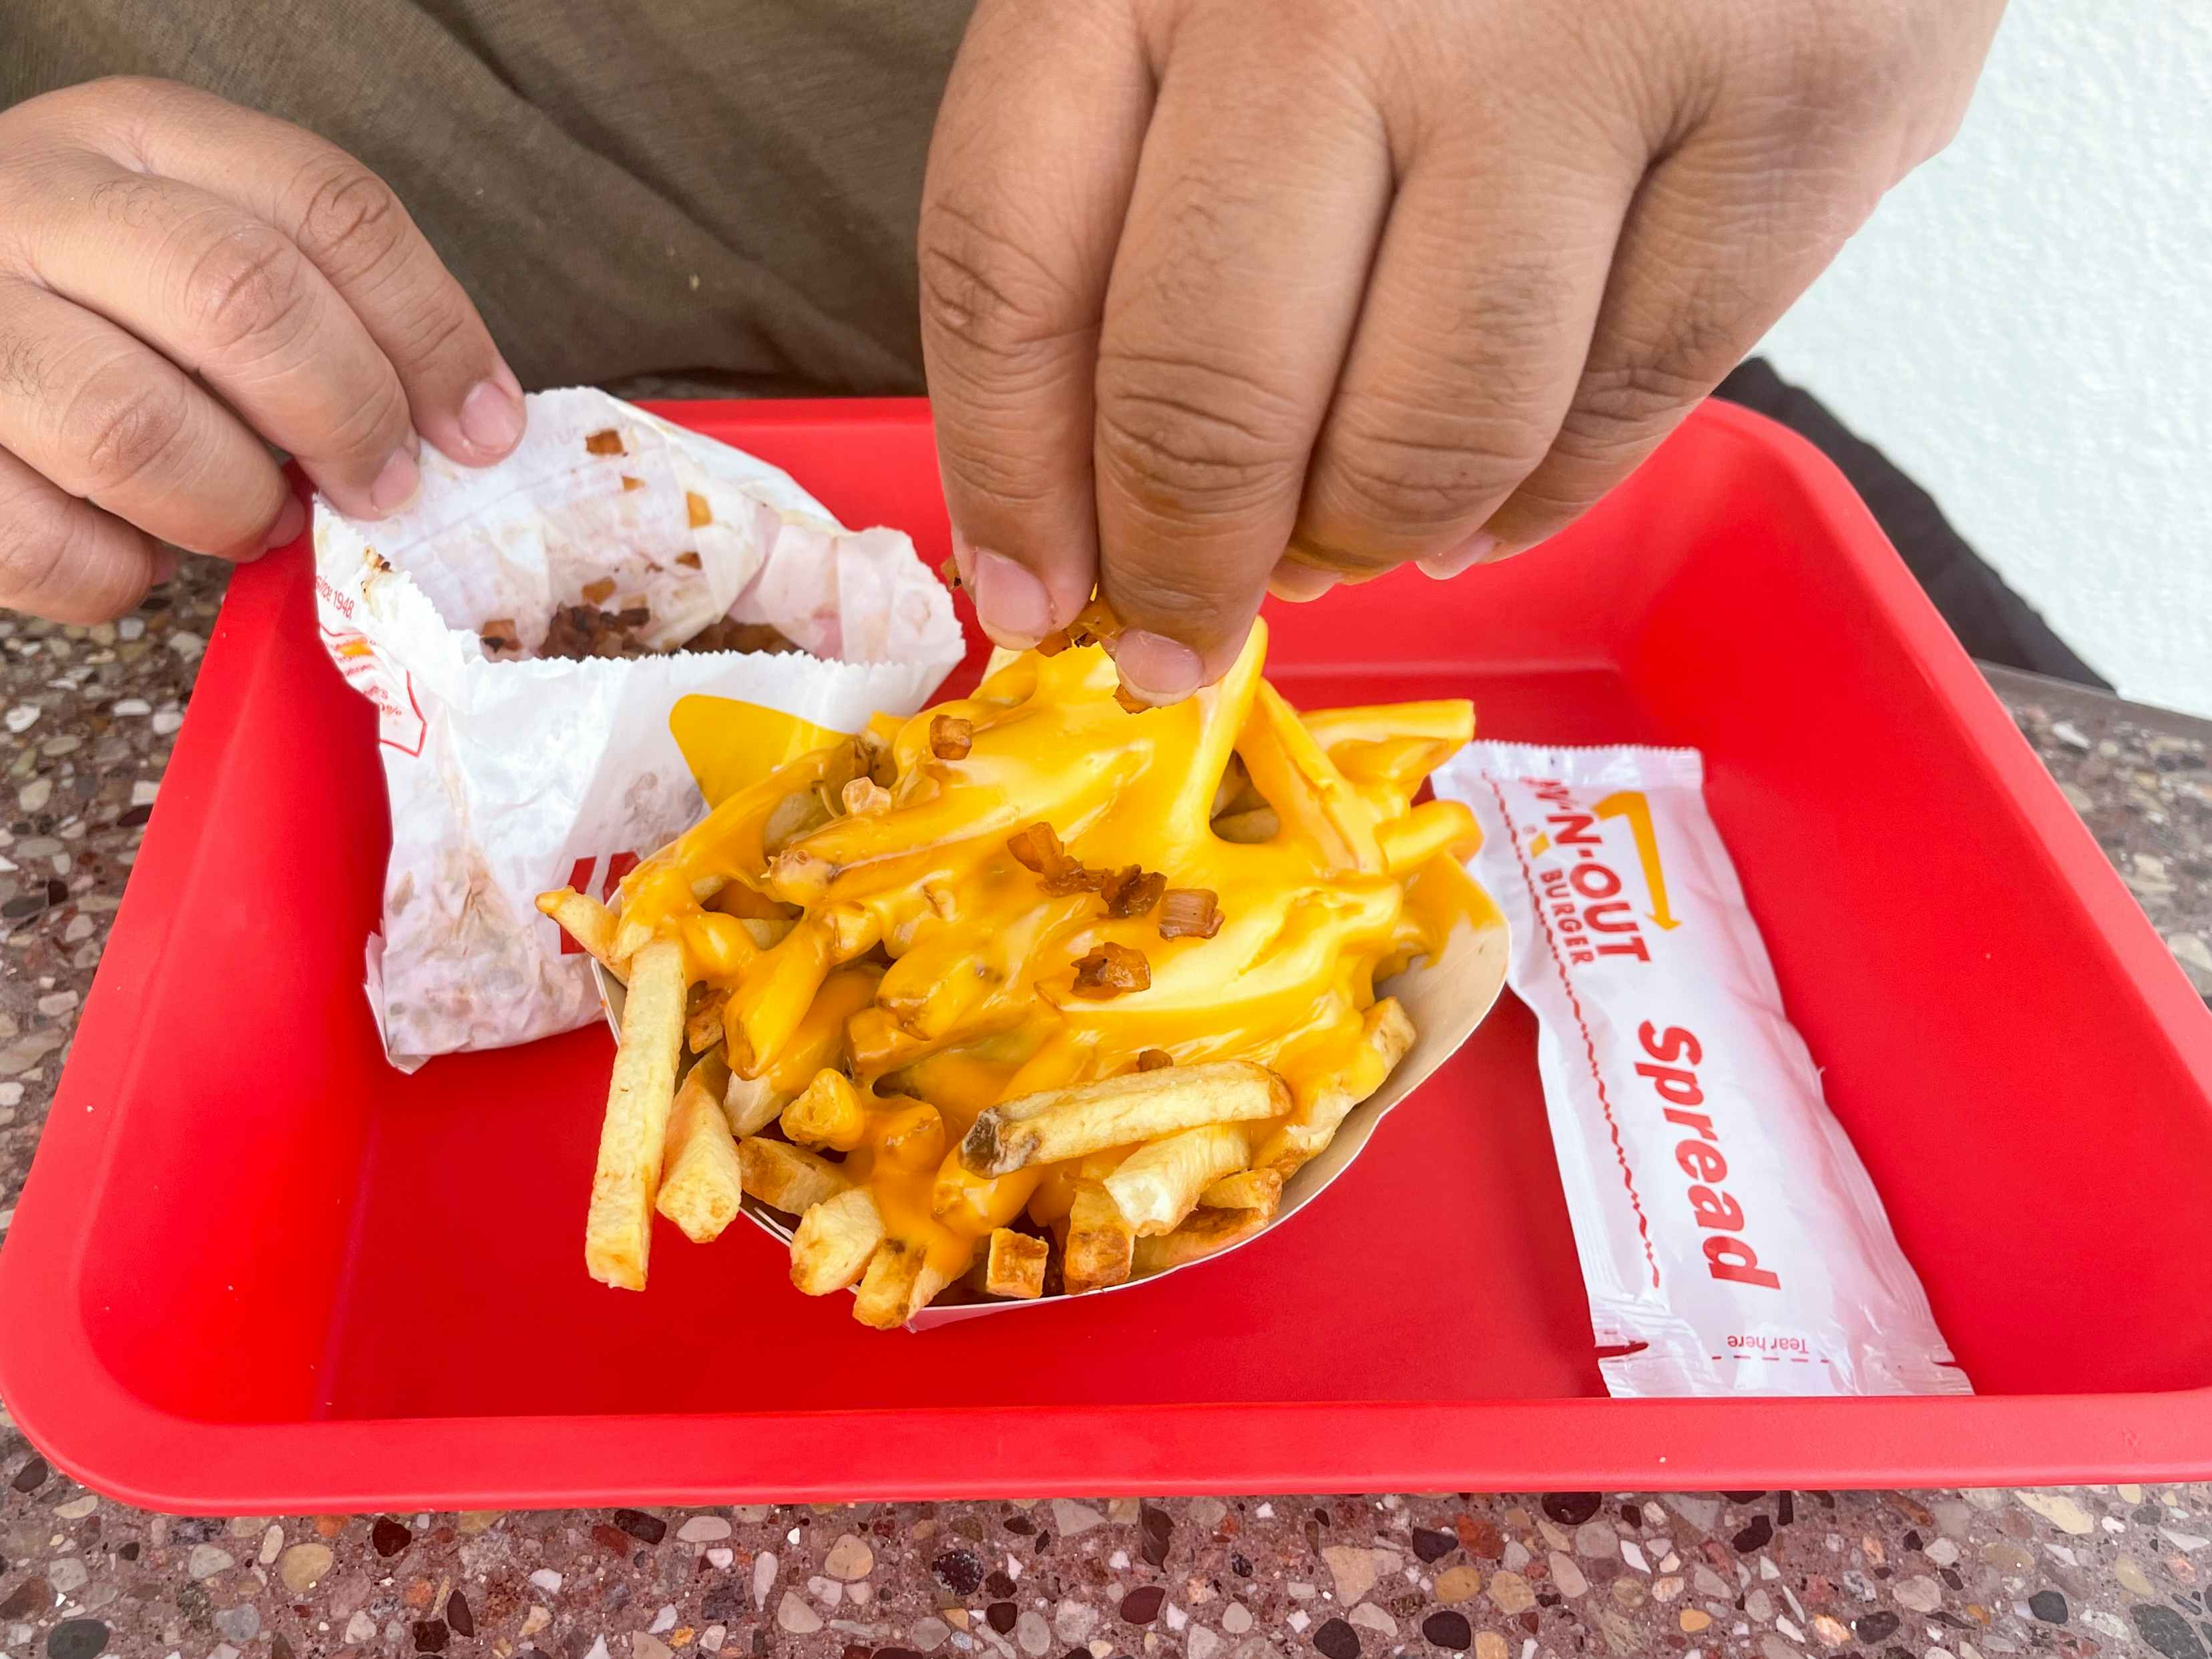 A person adding grilled onion to an order of french fries with melted cheese on top, with a packet of In-N-Out spread on the tray beside the fries.